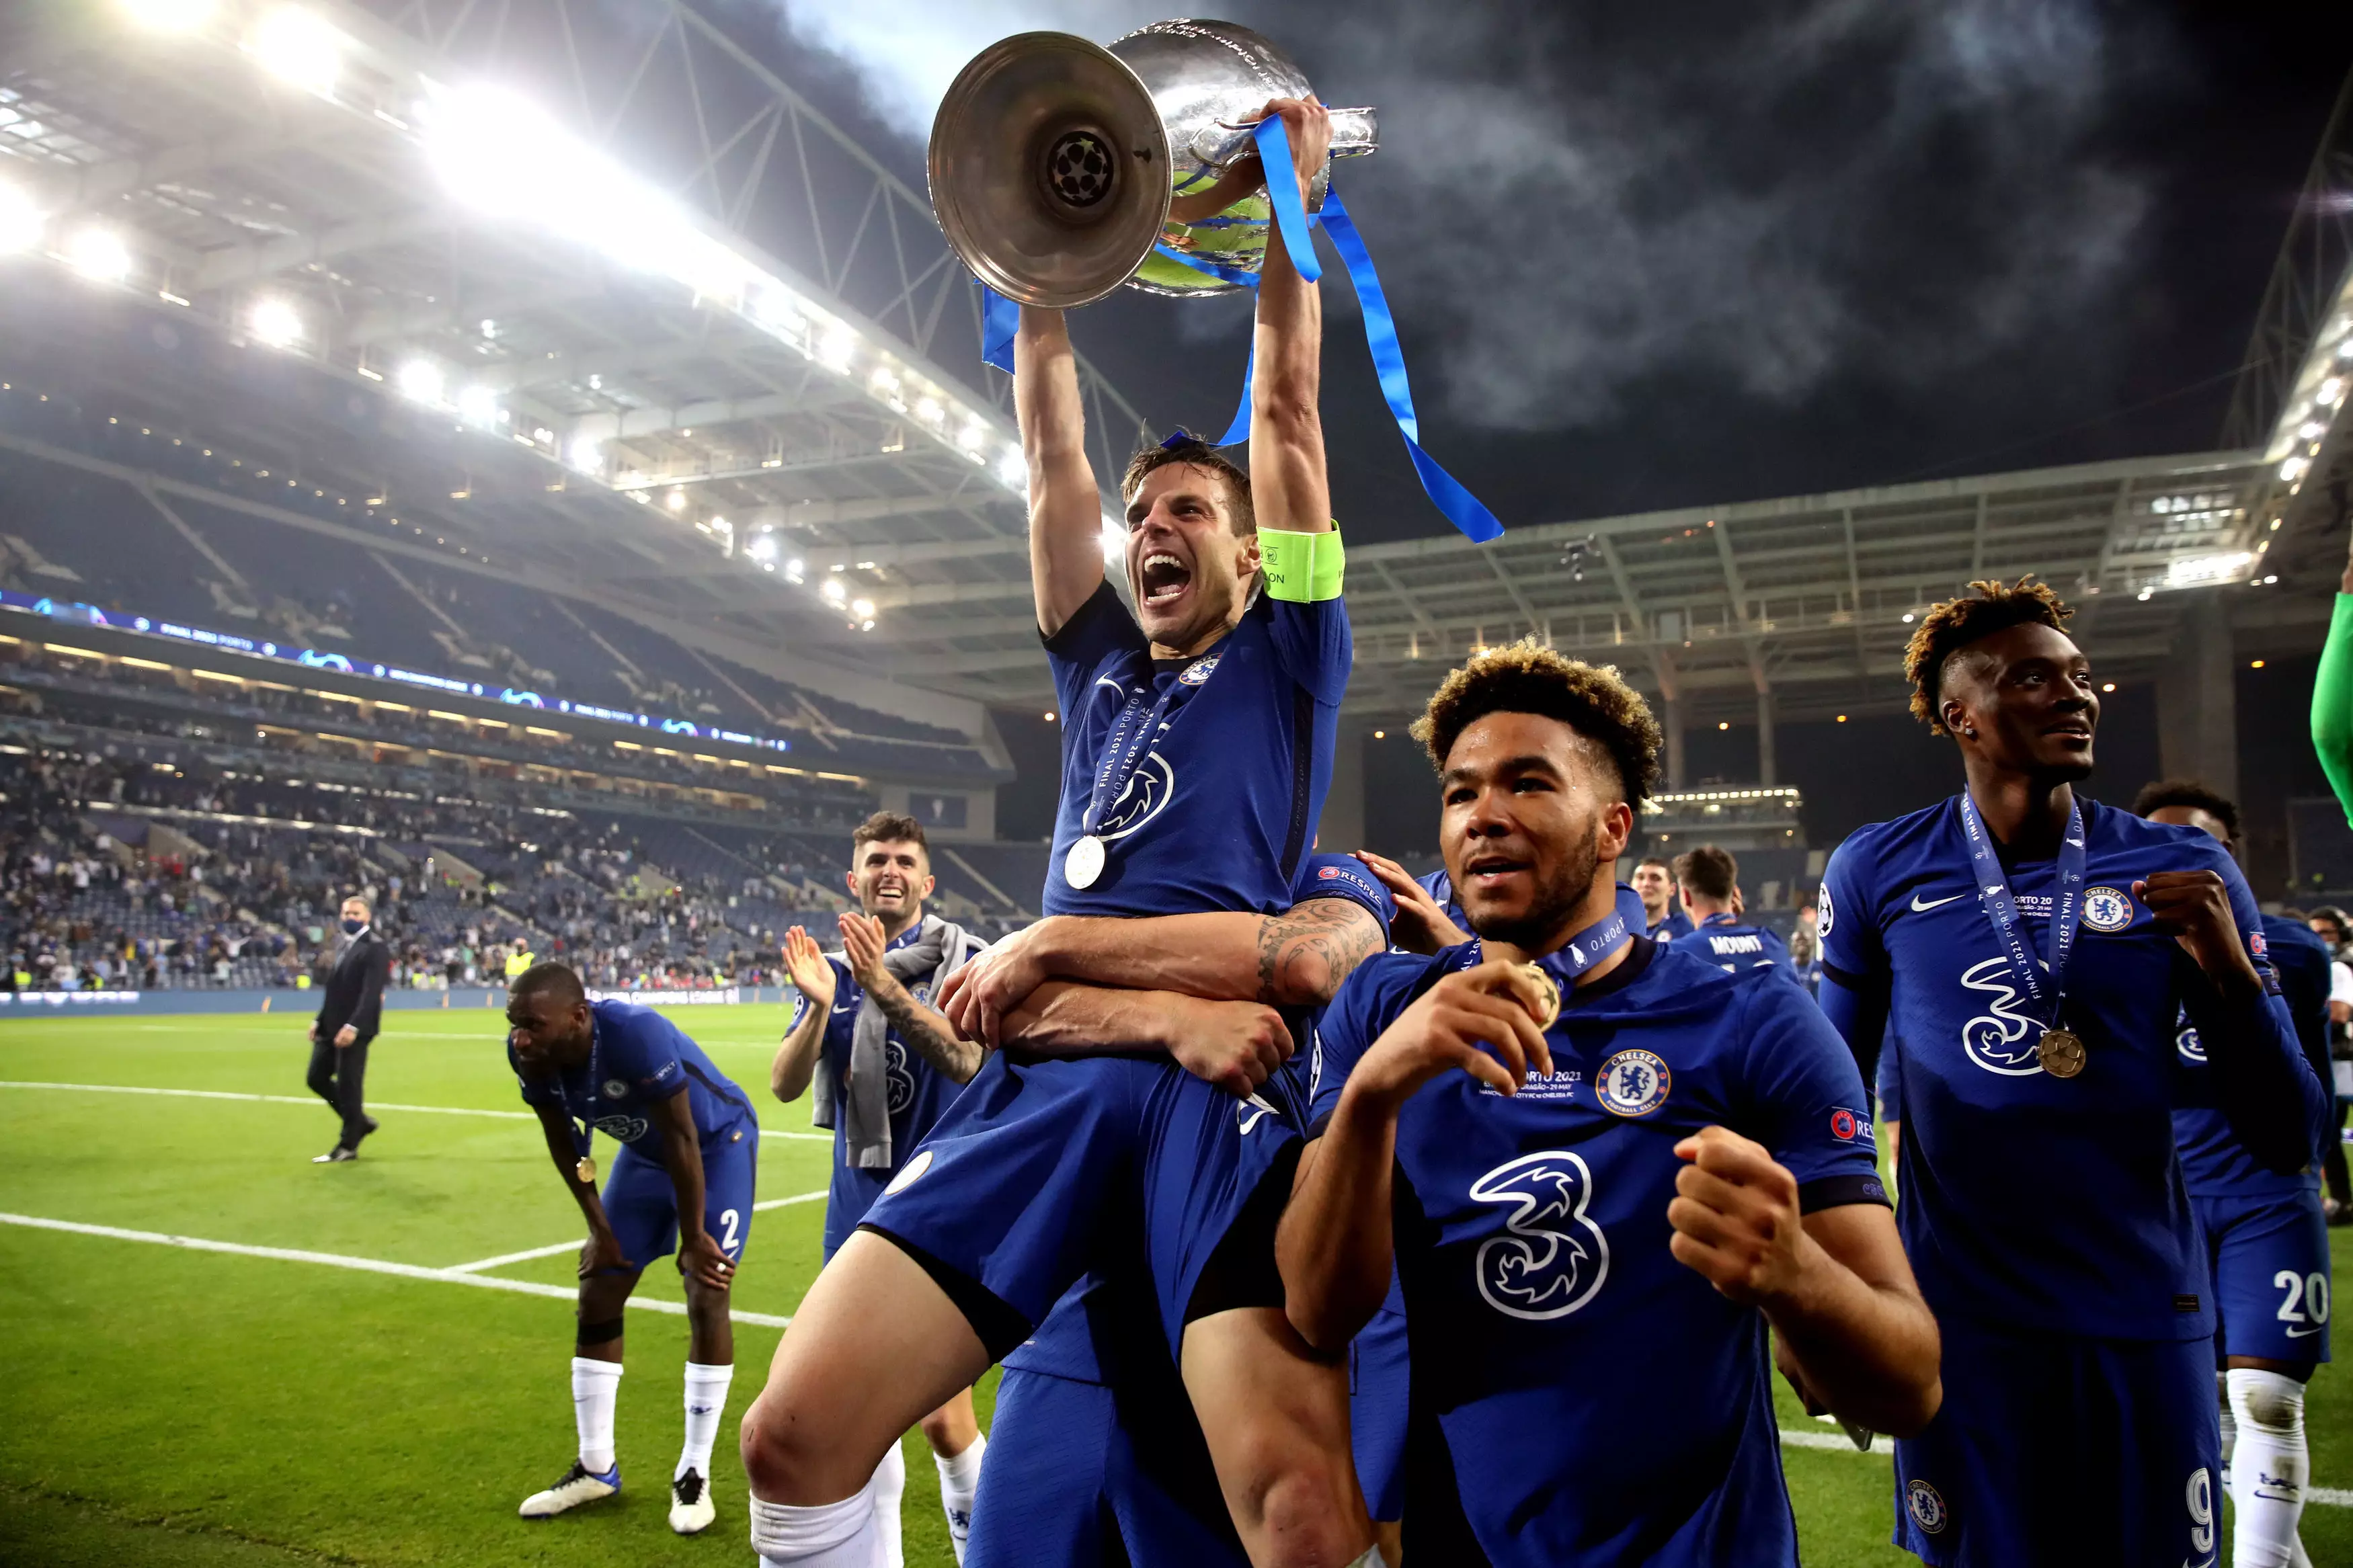 Chelsea won the Champions League last season after beating Manchester City 1-0 in the final